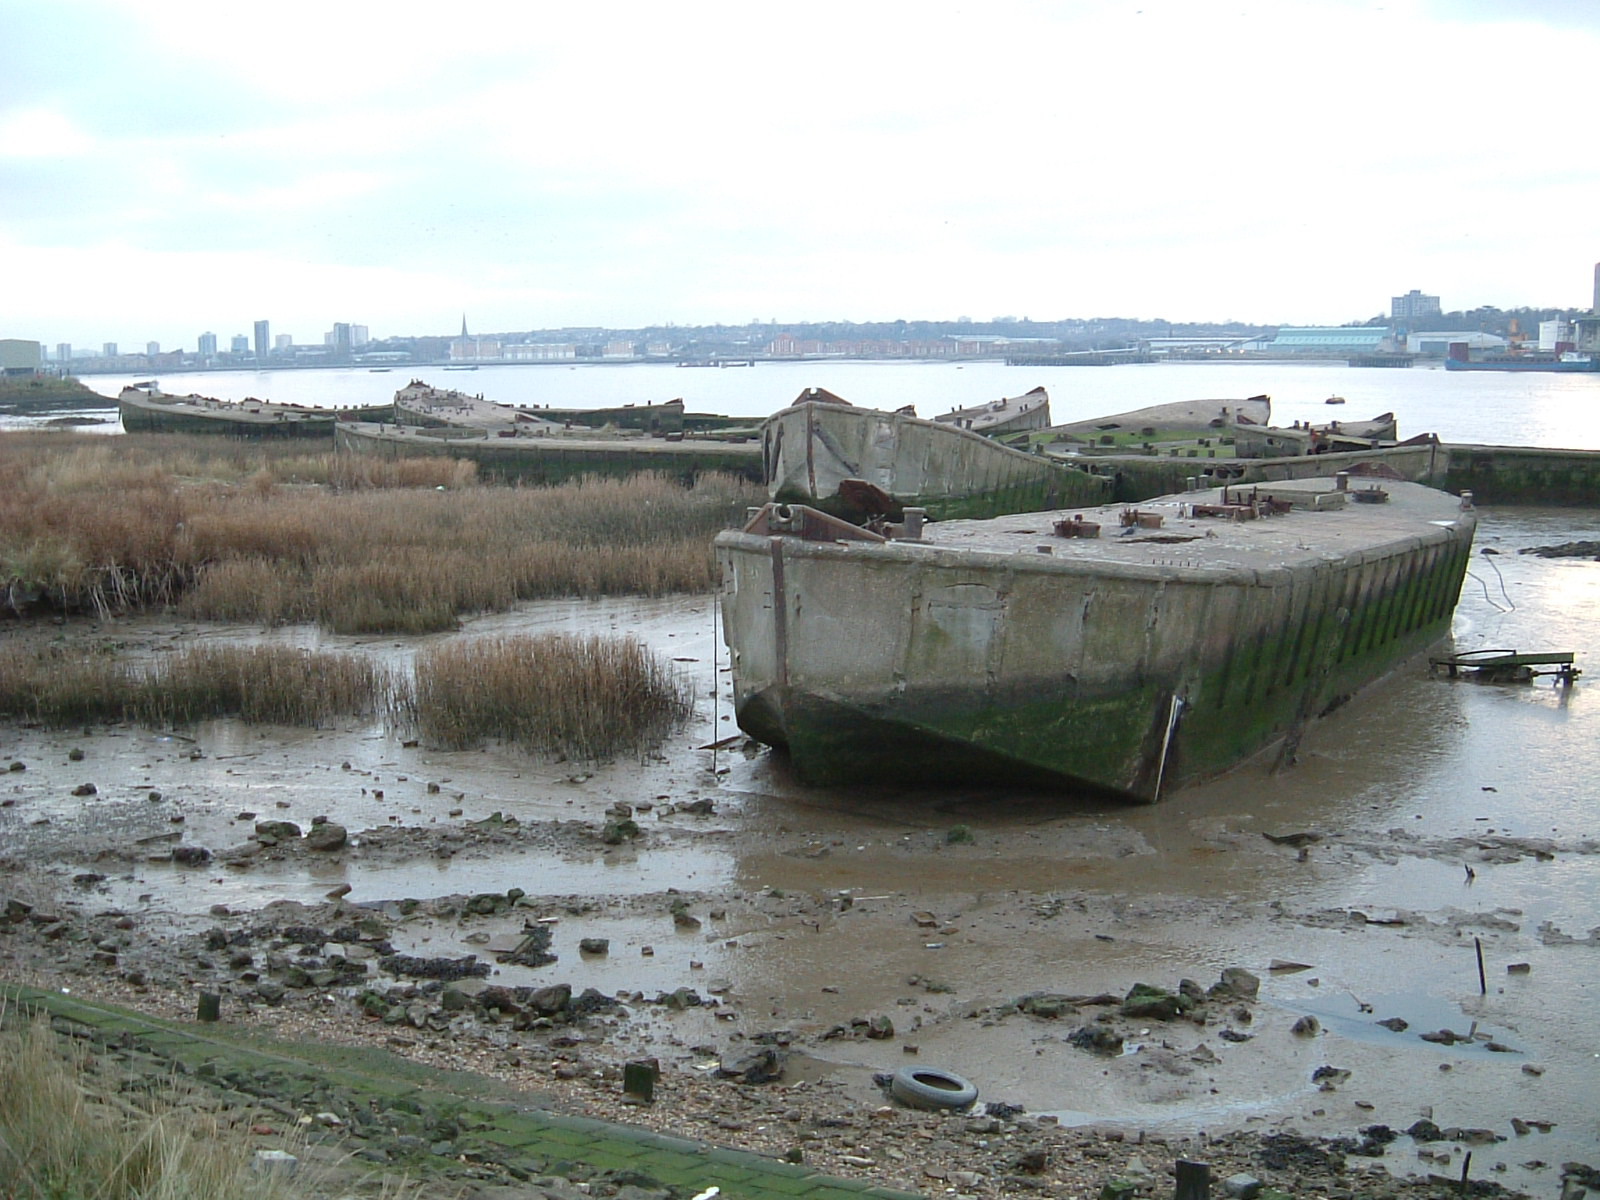 Concrete barges of D-Day scuppered in the Thames